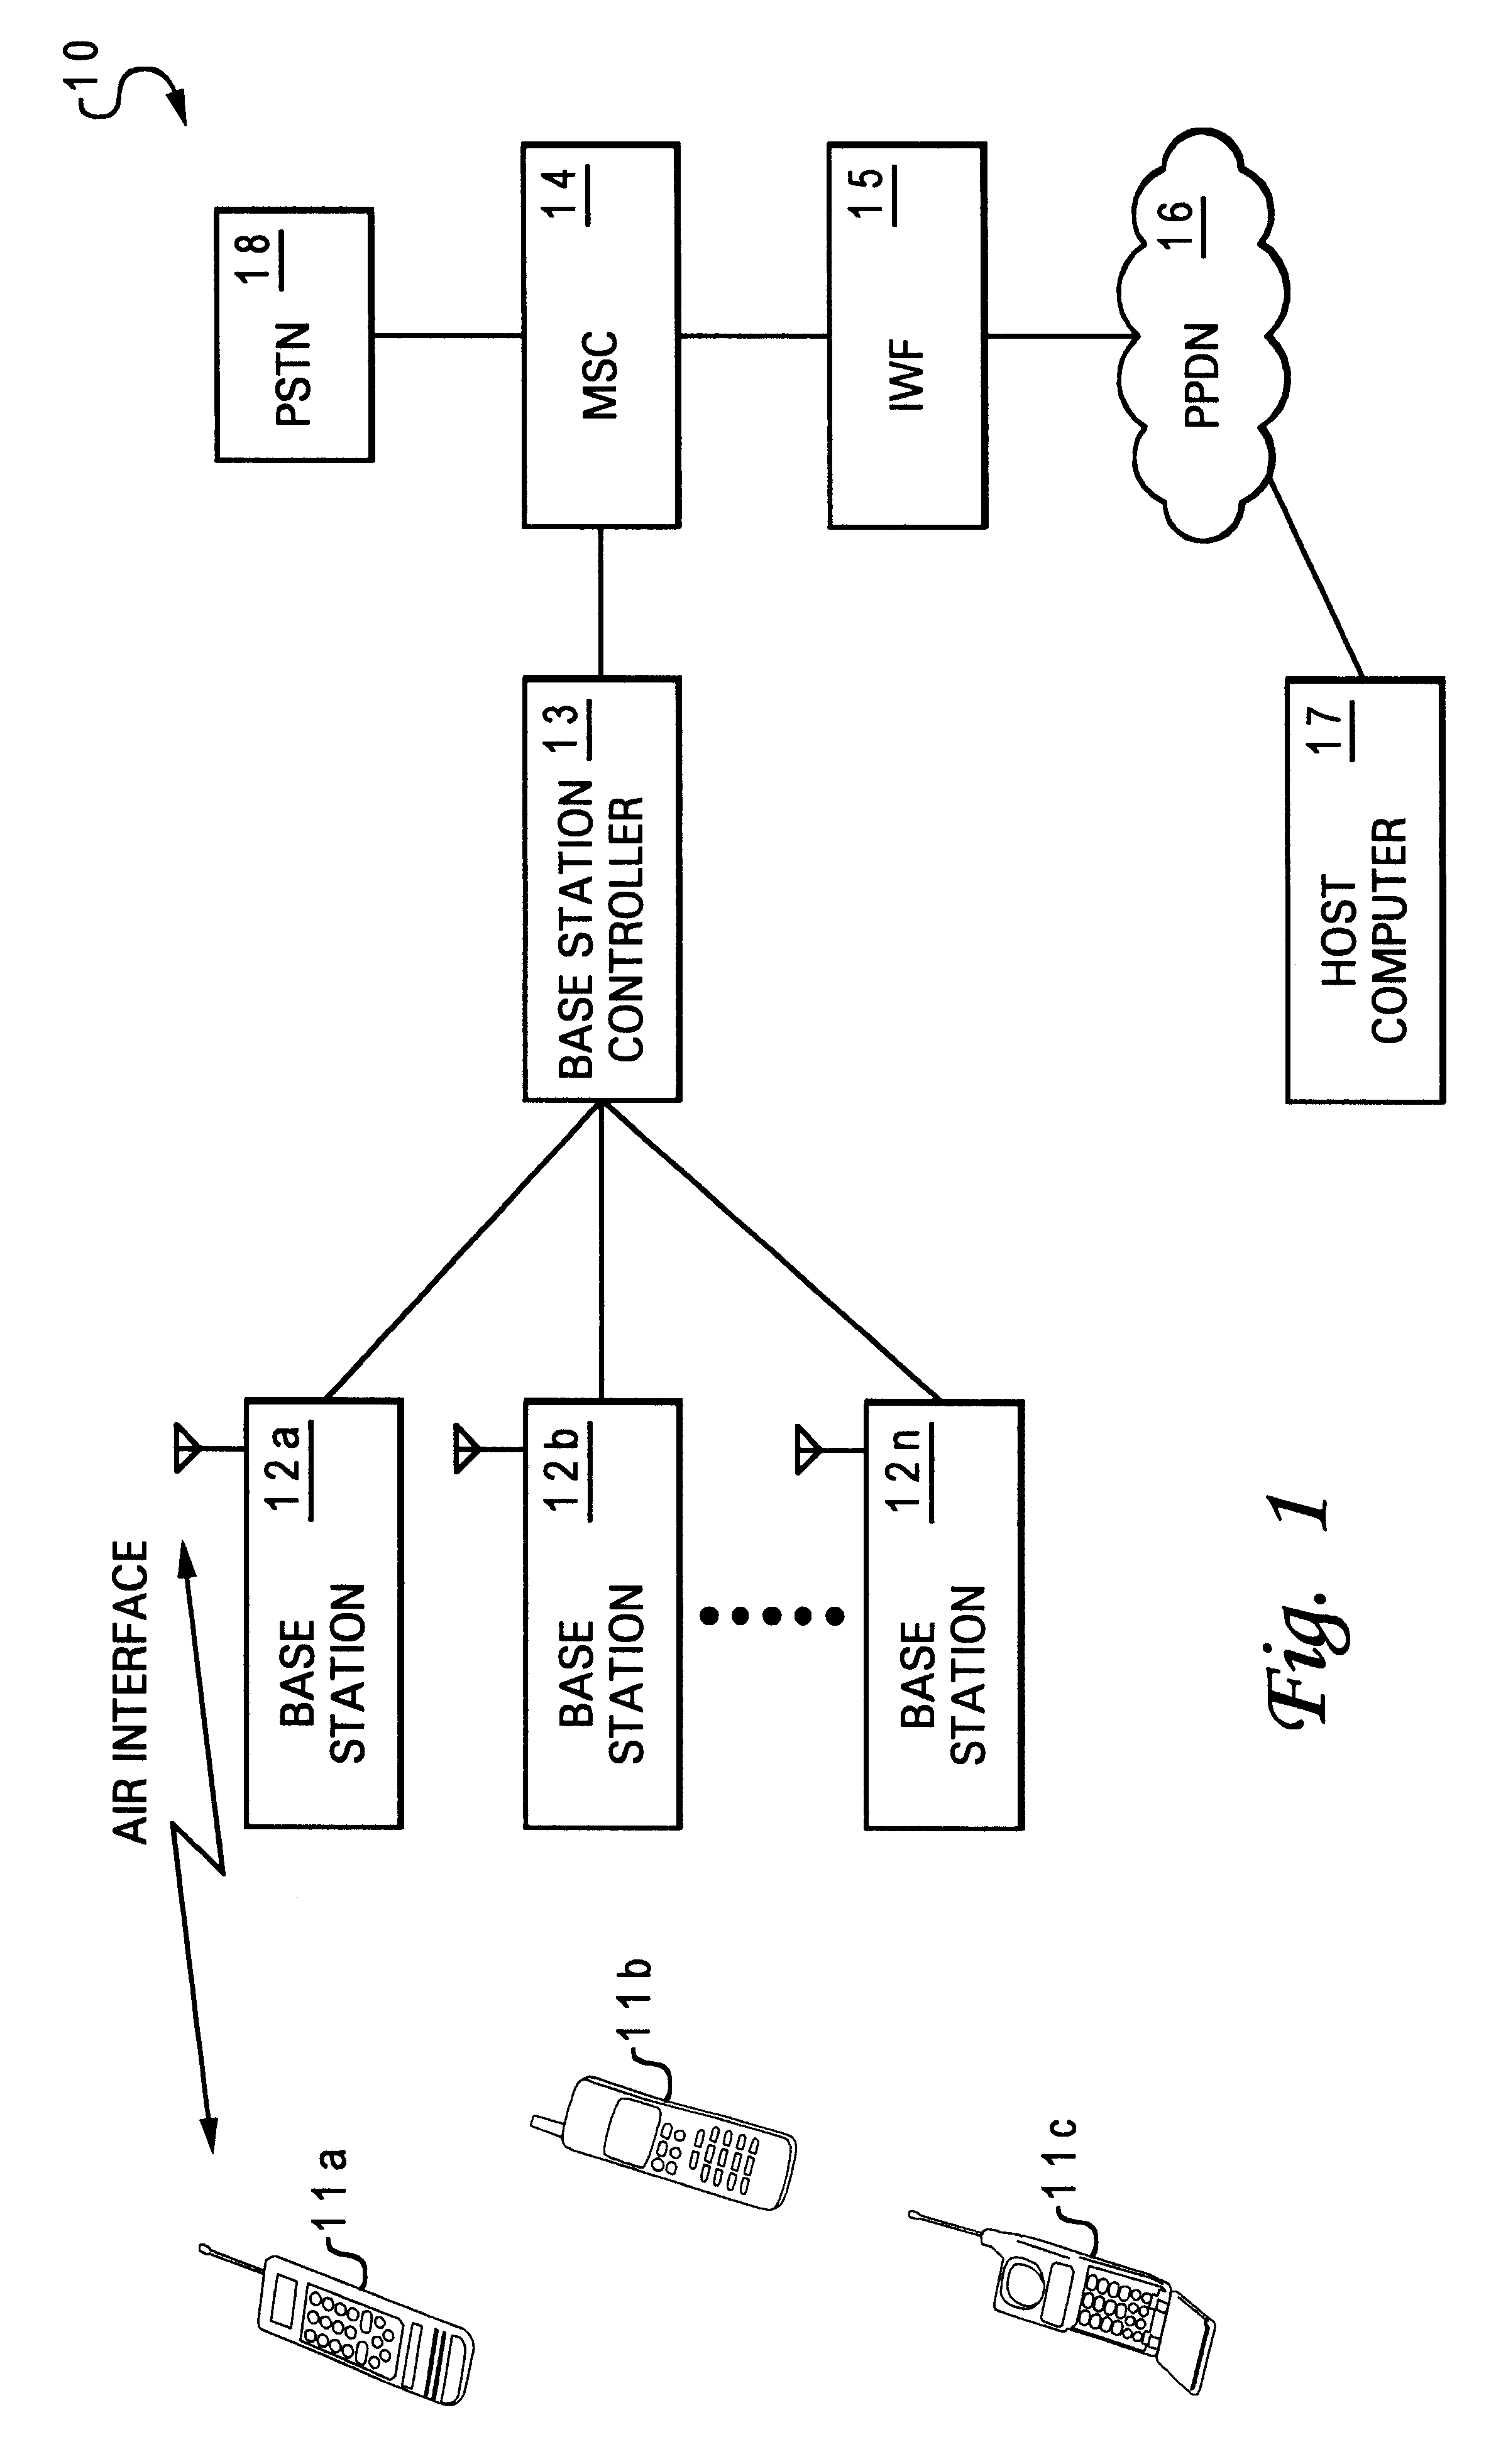 Method and system for limiting data packet transmission within a digital mobile telephone communication network by discarding unsuccessfully transmitted radio link protocol frames